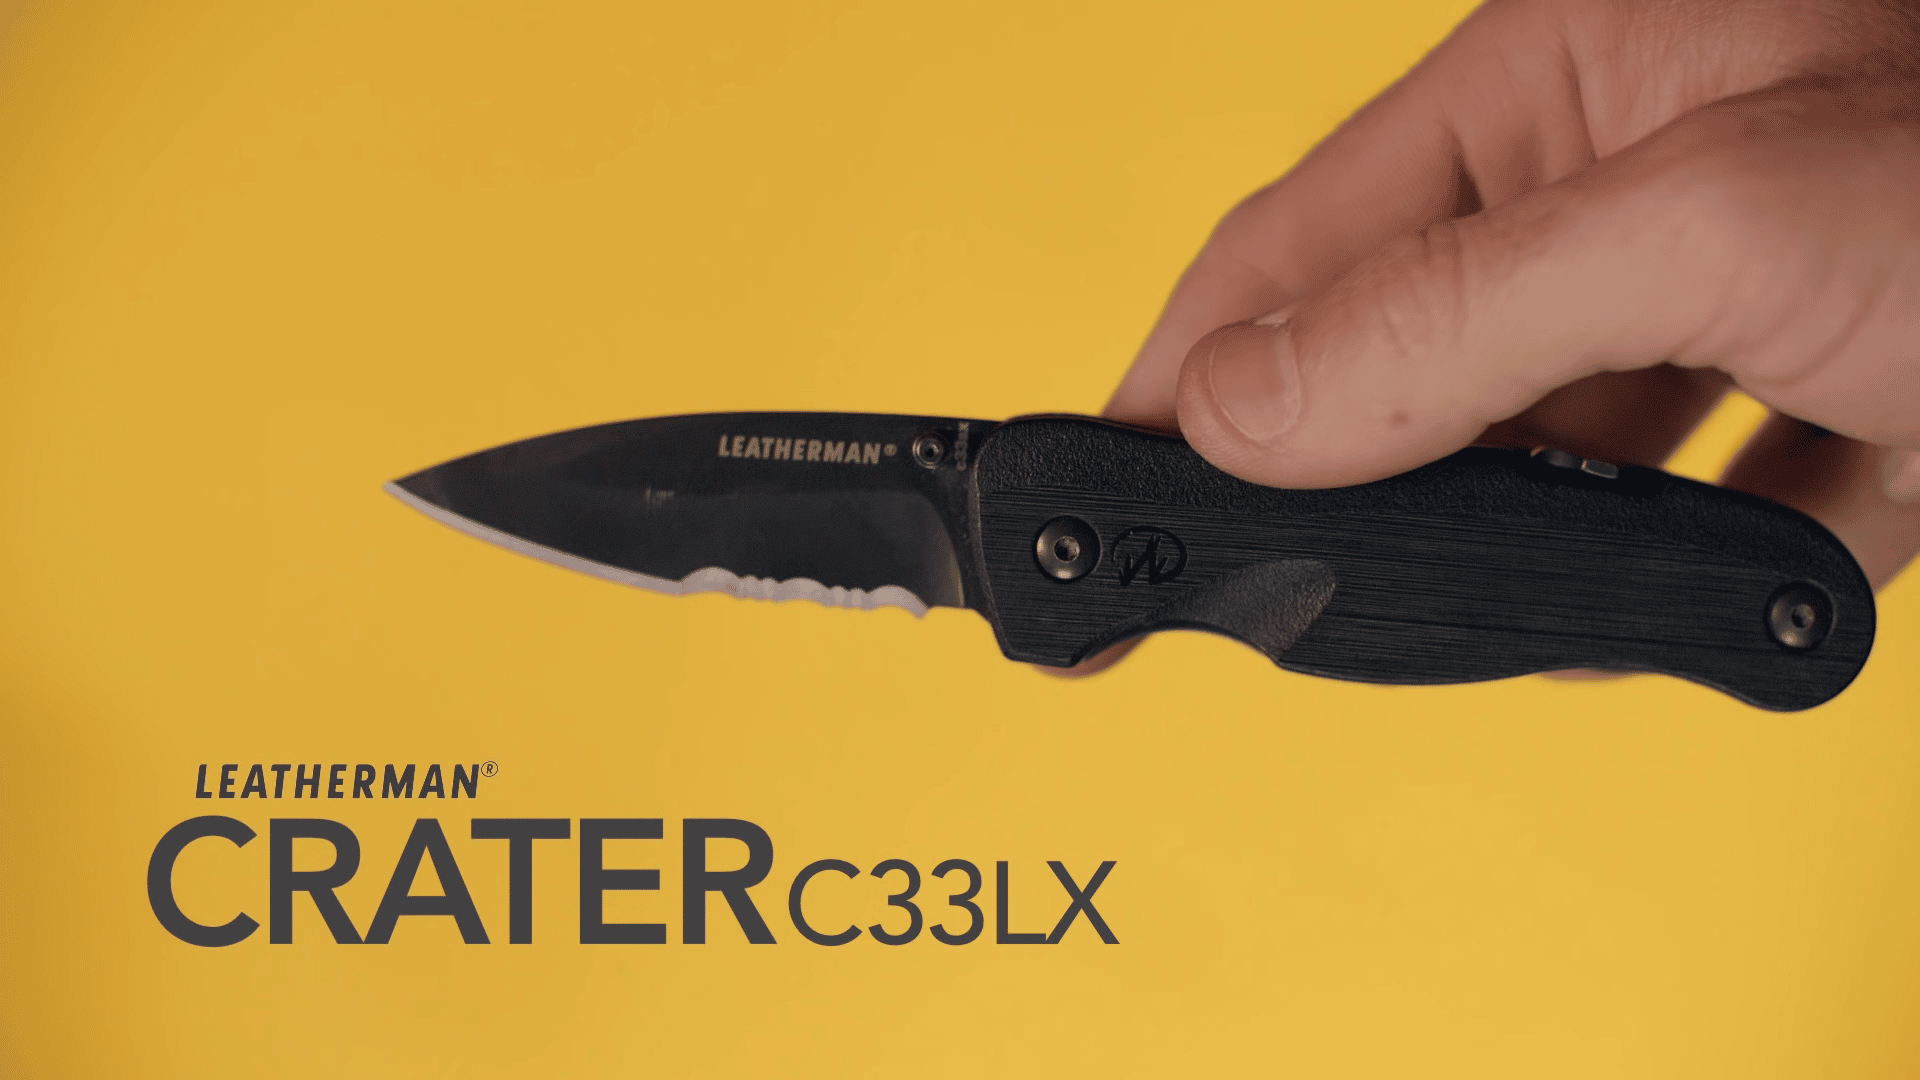 Dao đa năng Leatherman Crater C33LX (Stainless Steel)